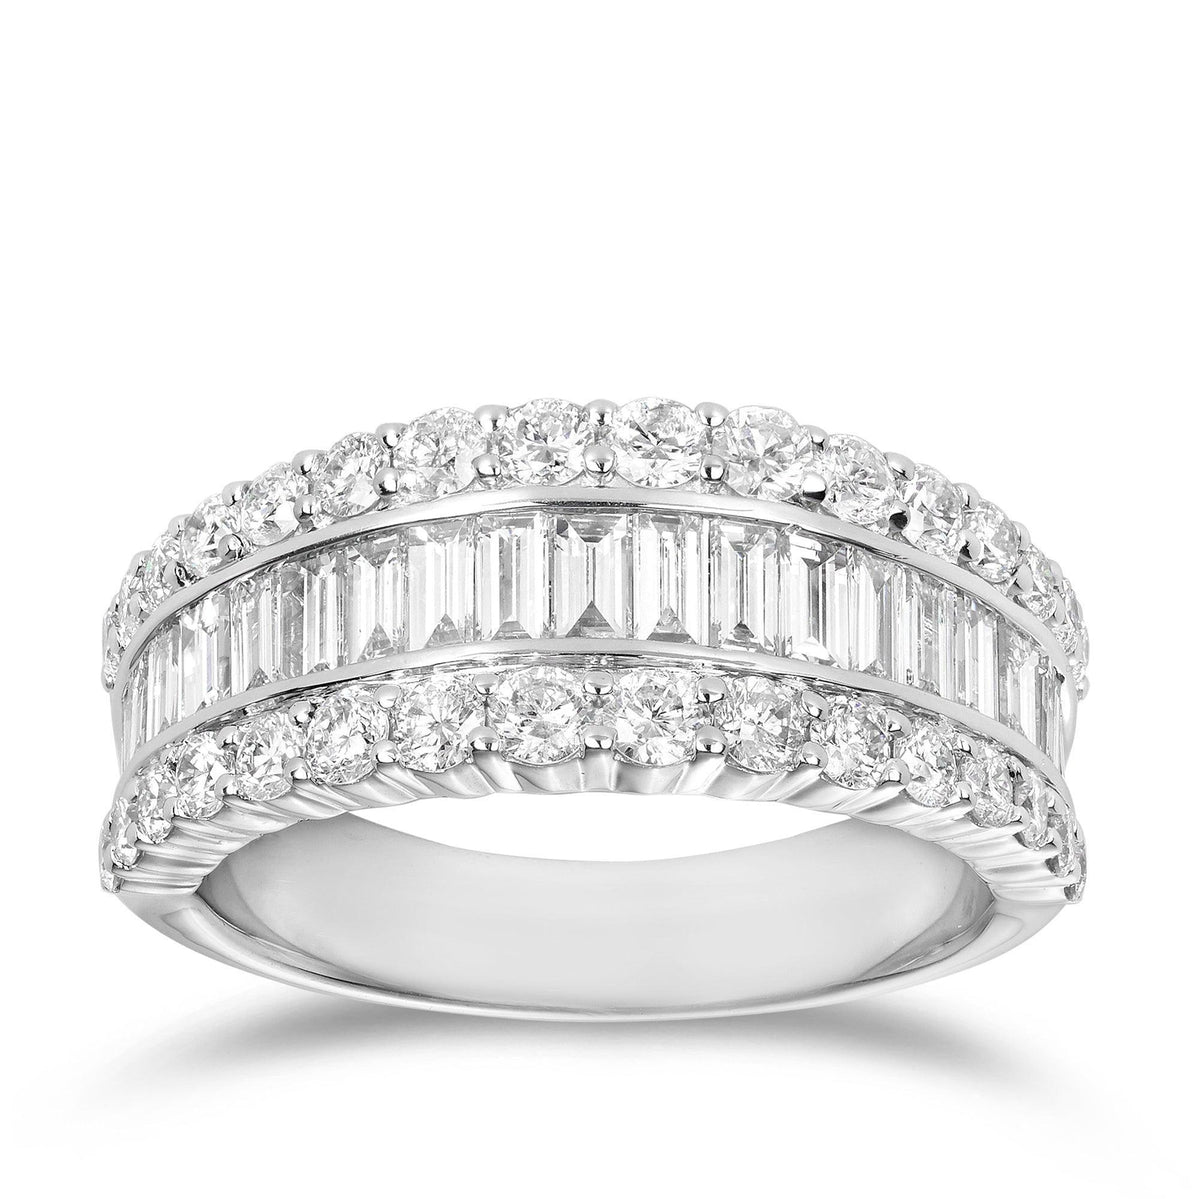 Round Brilliant Cut & Baguette Diamond Ring in 18ct White Gold - Wallace Bishop